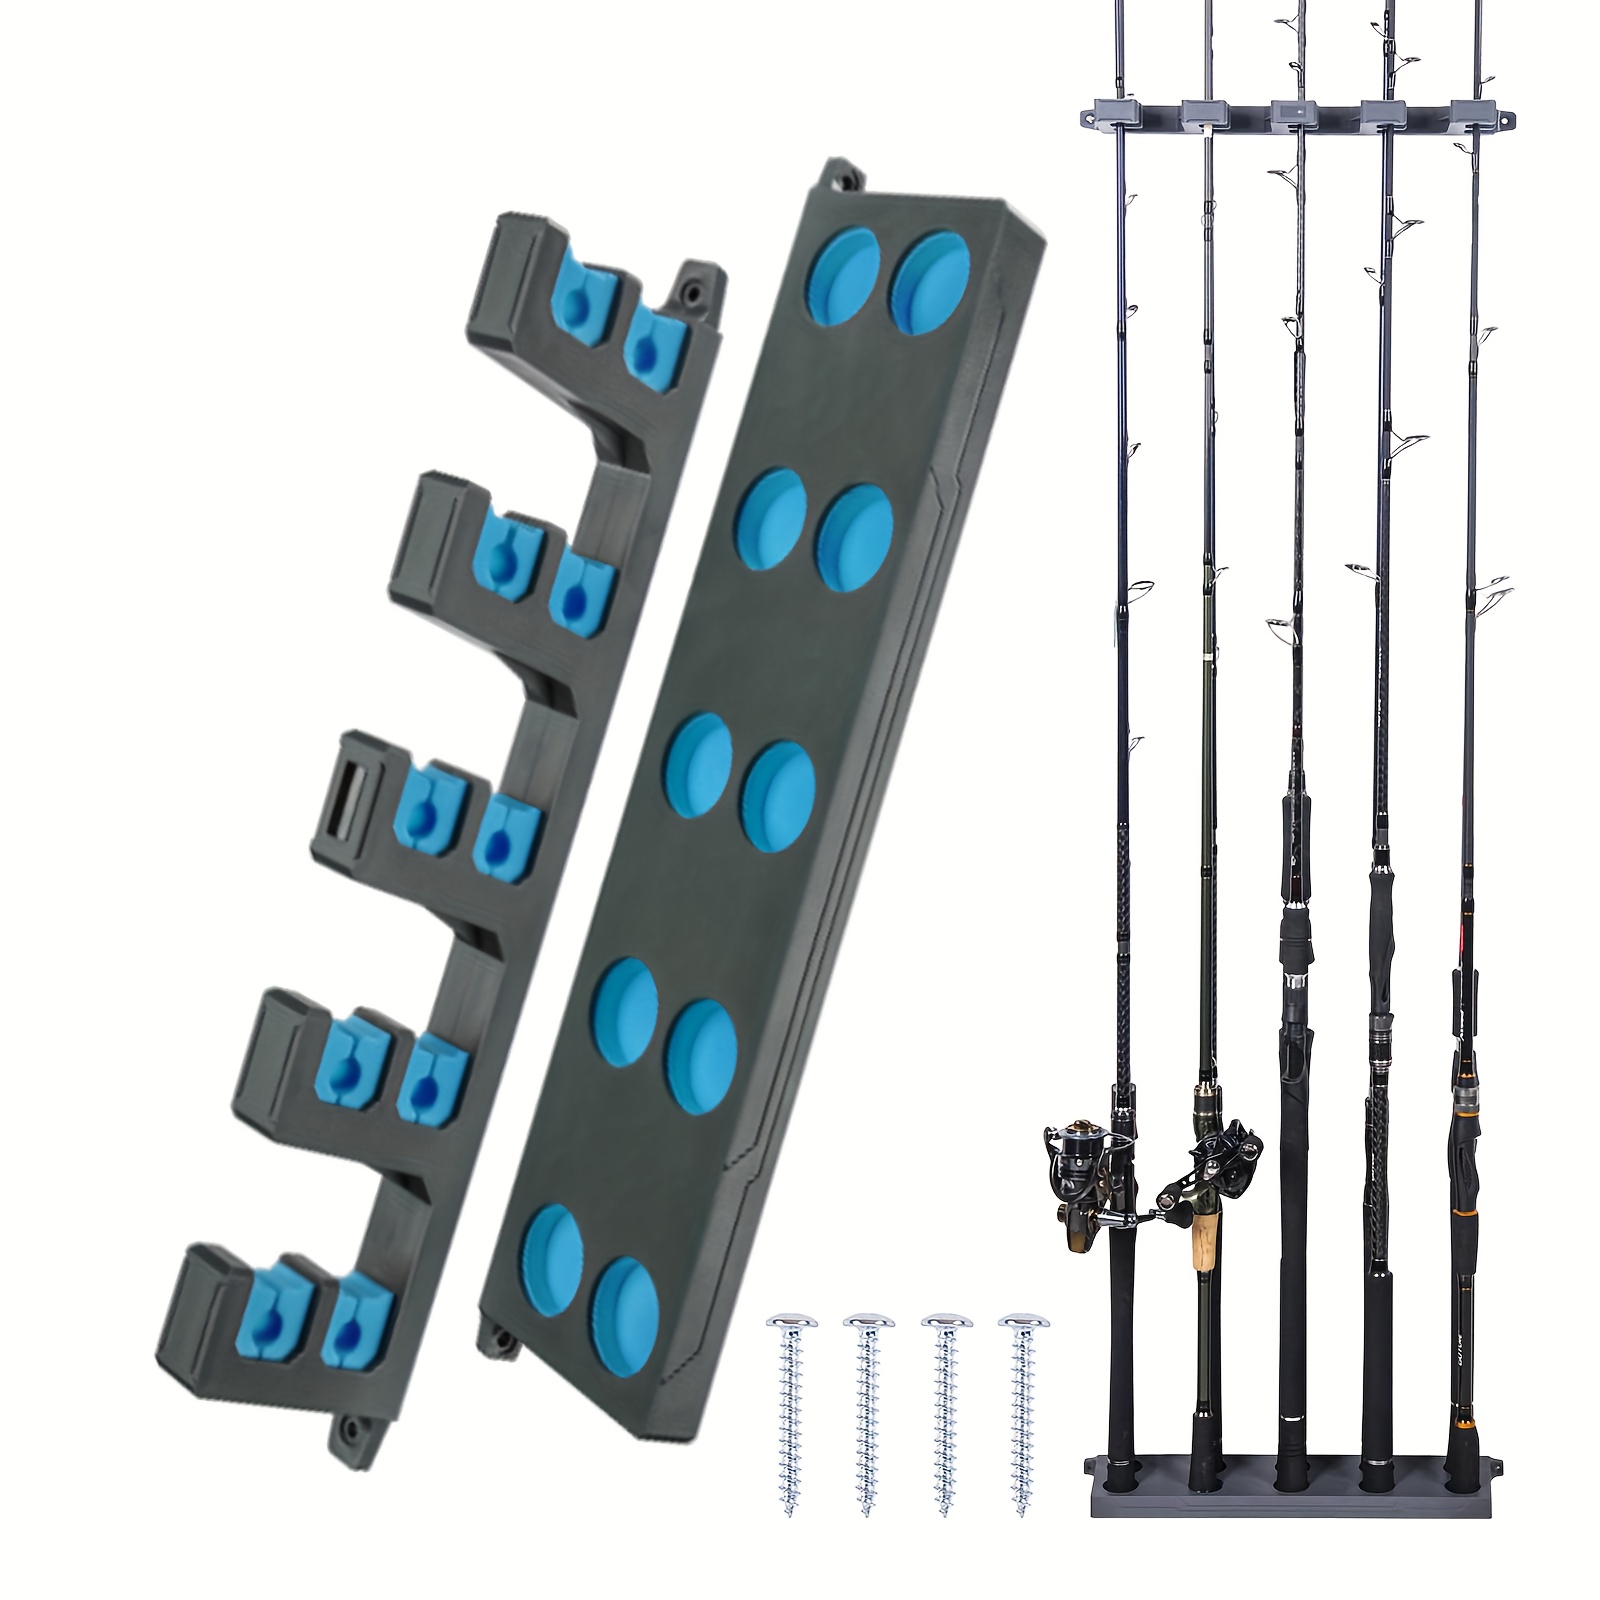 One Bass Fishing Rod Rack Metal Aluminum Alloy Portable Fishing Rod Holder  Fishing Rod Organizer for All Type Fishing Pole, Hold Up to 24 Rods :  : Sports & Outdoors